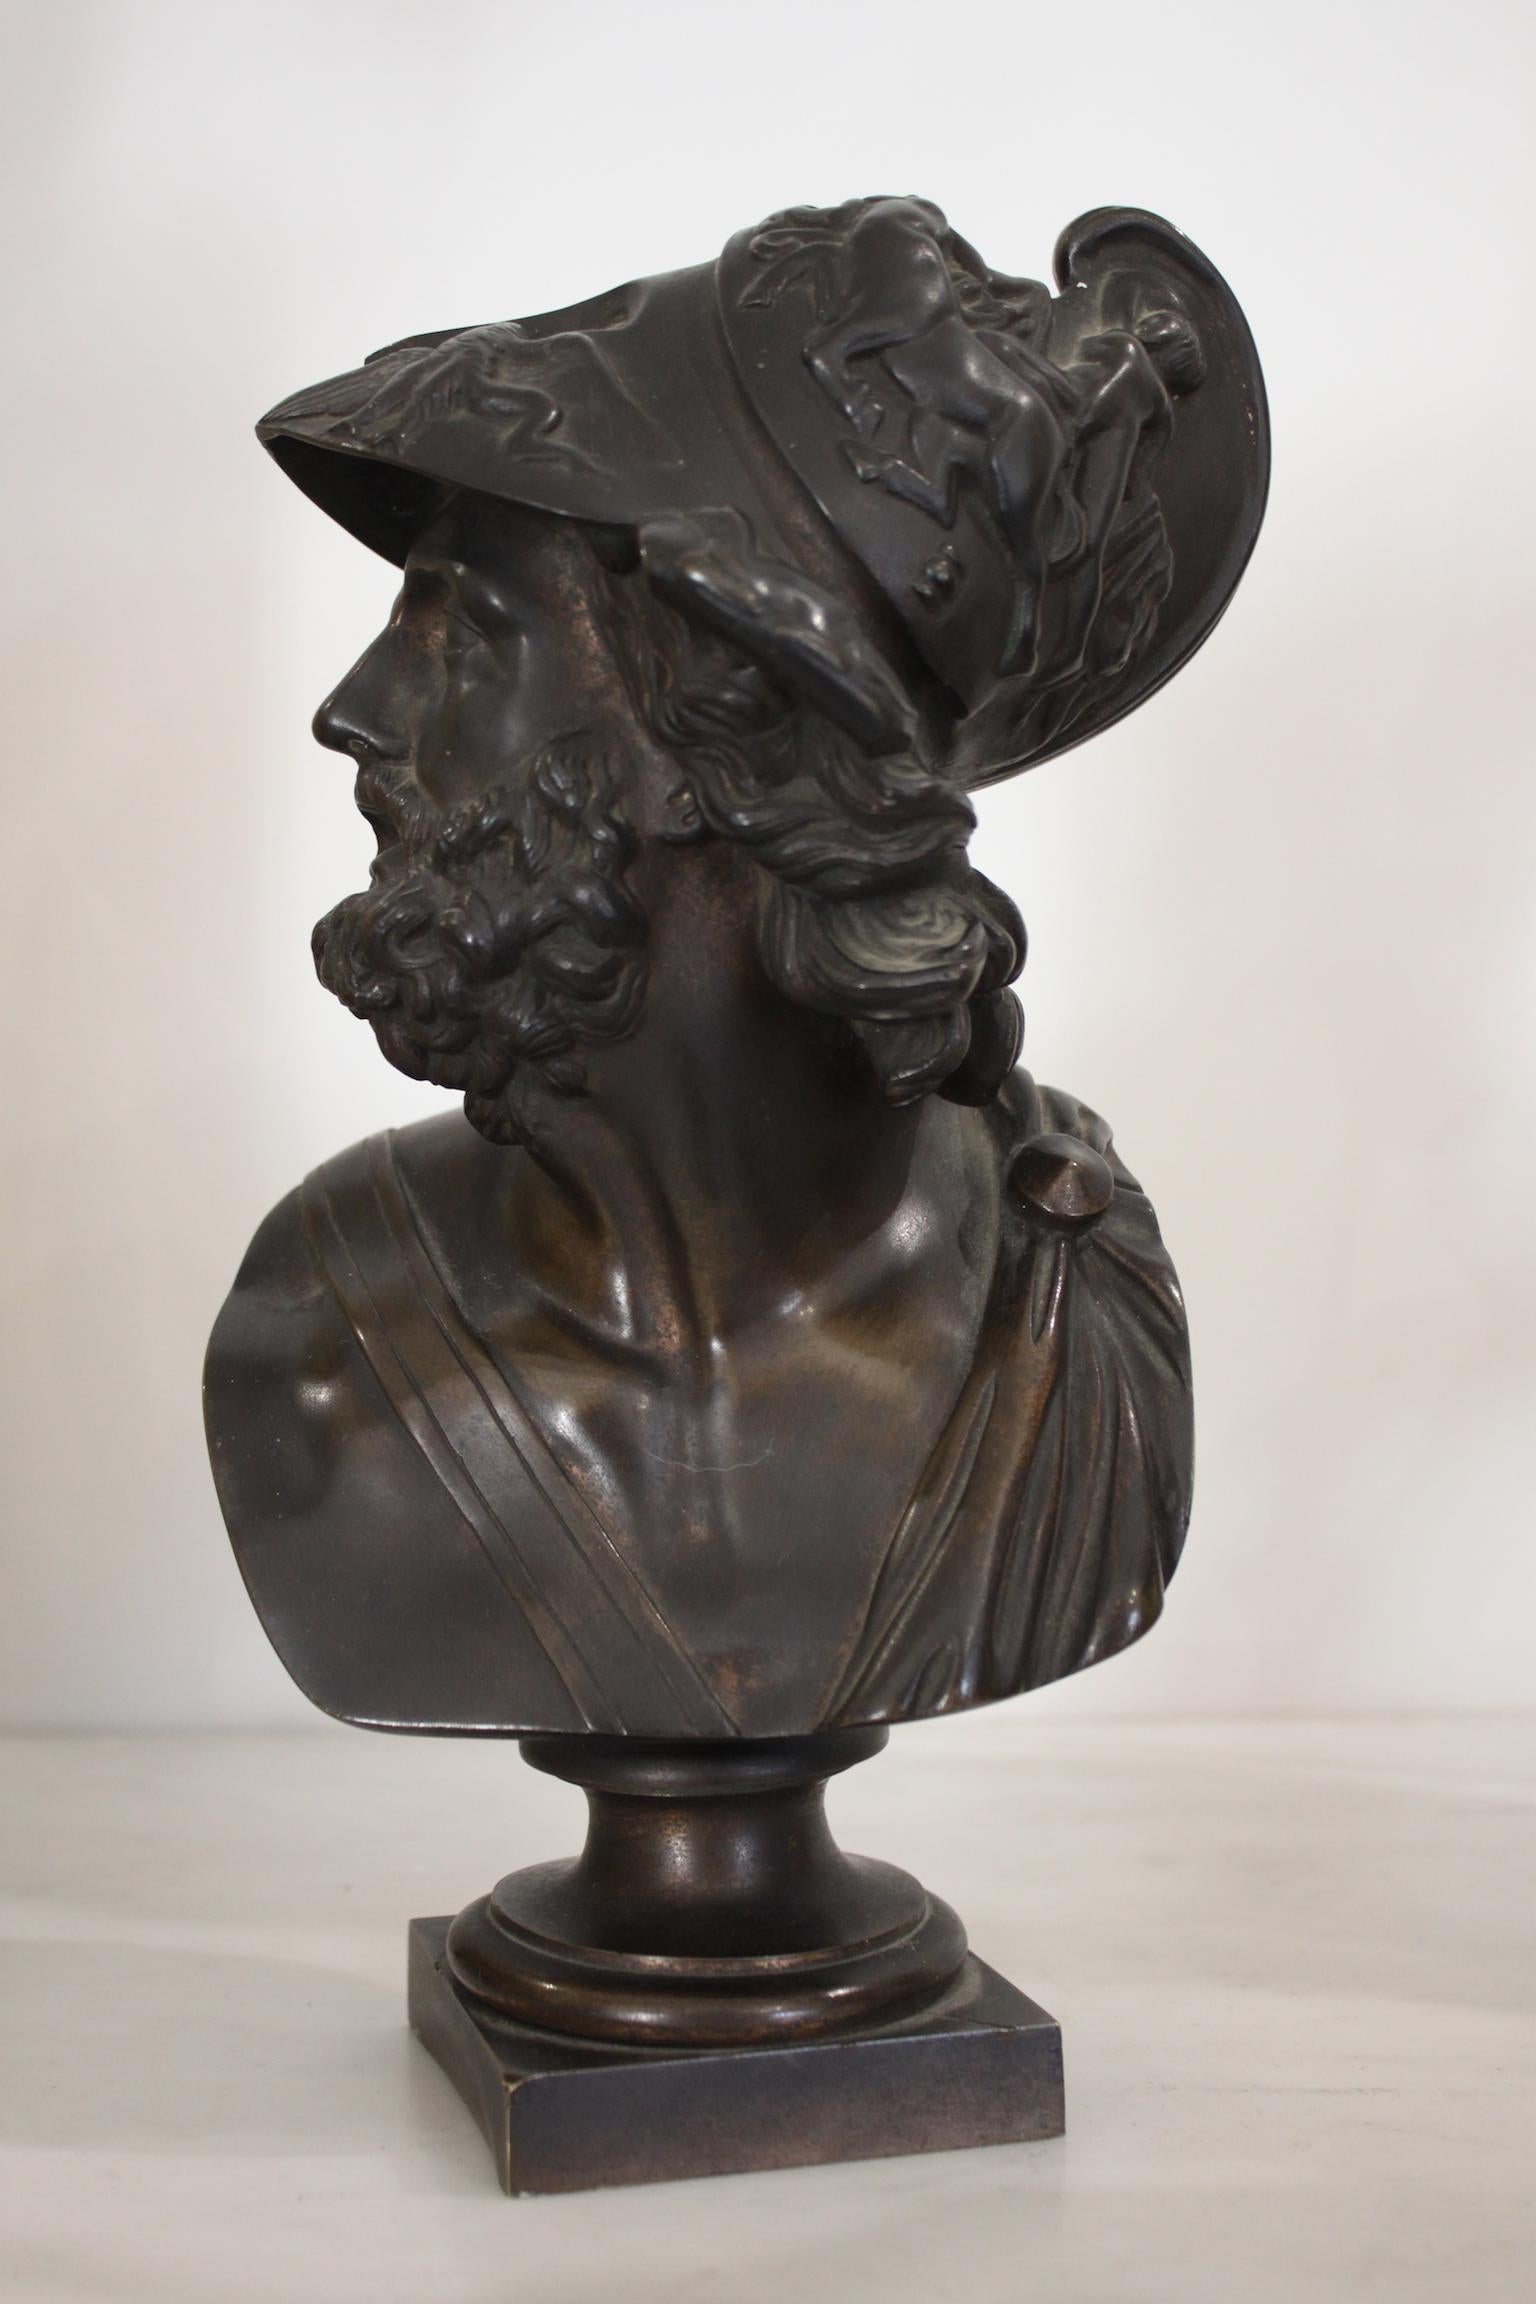 19th century bronze bust of pericle, souvenir of the Grand Tour. 
Dimensions: Height 26cm, width 14cm, depth 10cm.